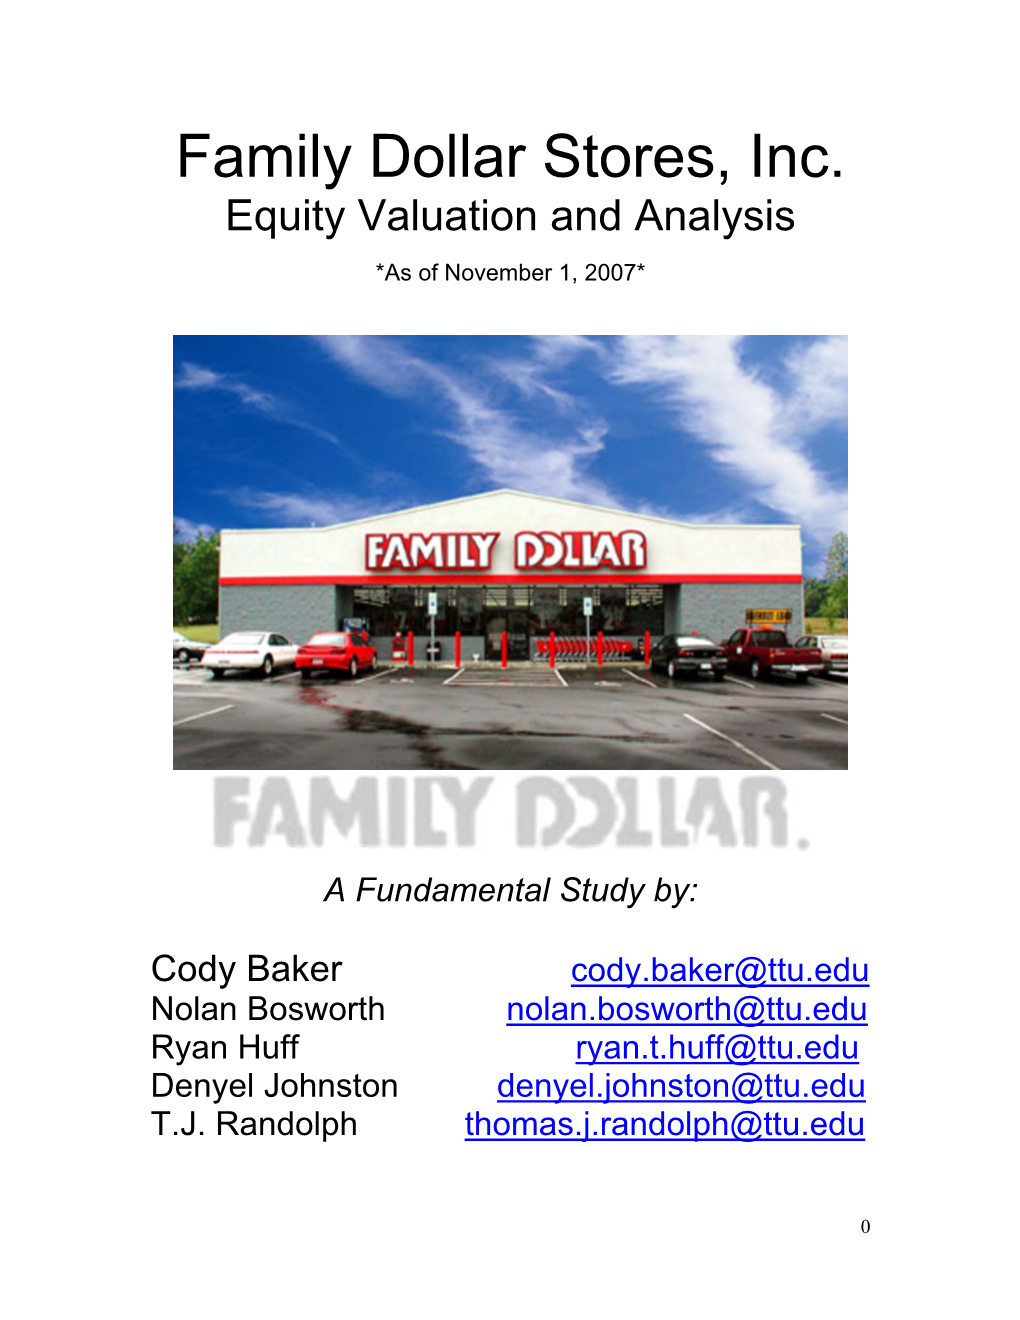 Family Dollar Stores, Inc. Equity Valuation and Analysis